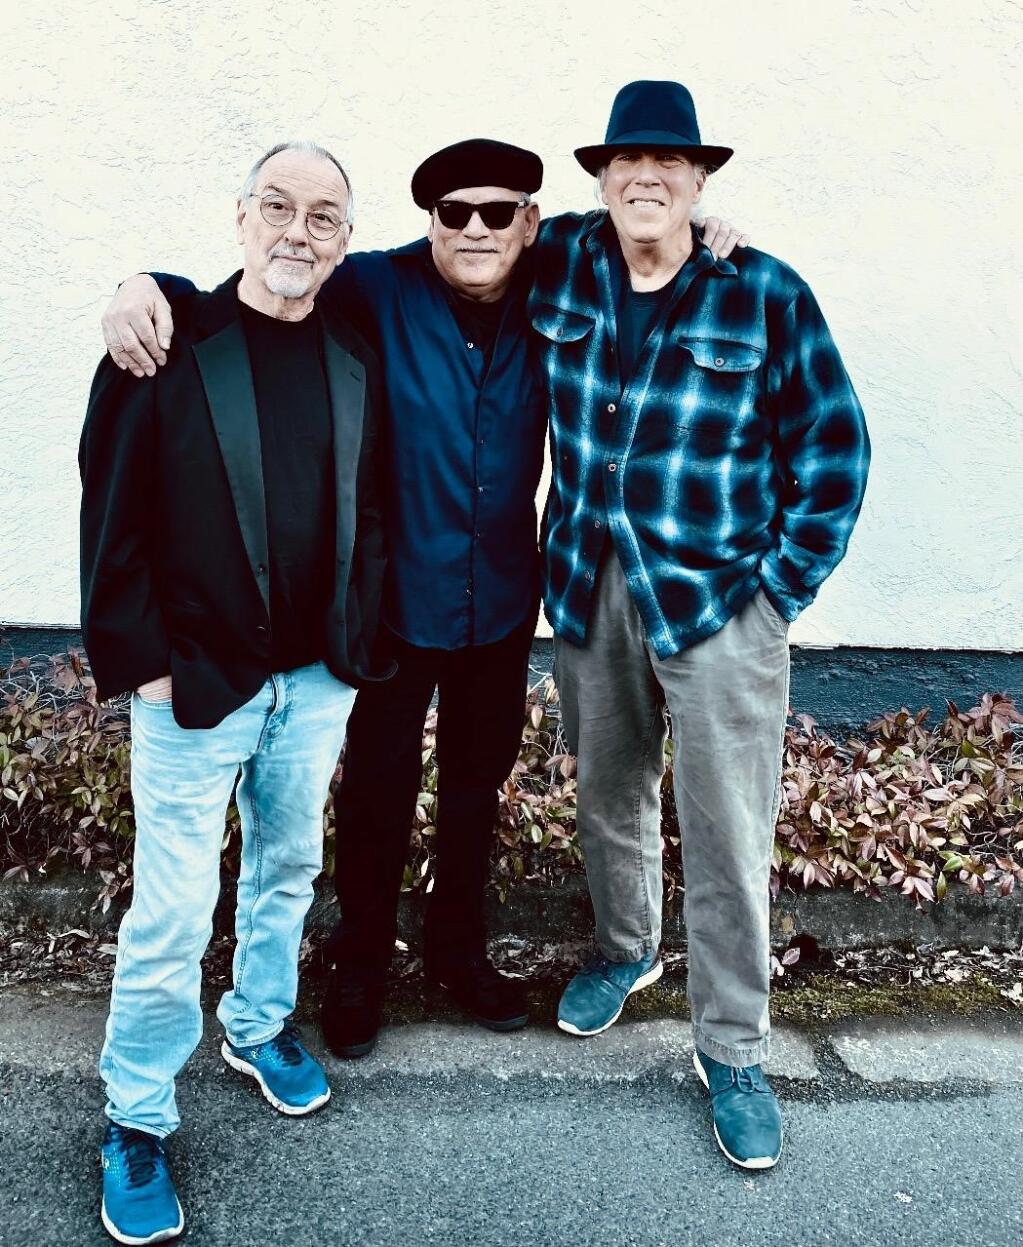 Local players Mark Willson, Mark Dennis and Mario Ramirez have a long history of performing here in the Valley. Their band is cleverly called MaMaMa. Their partnership with MaMaMa is recent, but their musical roots are deep. (Submitted)